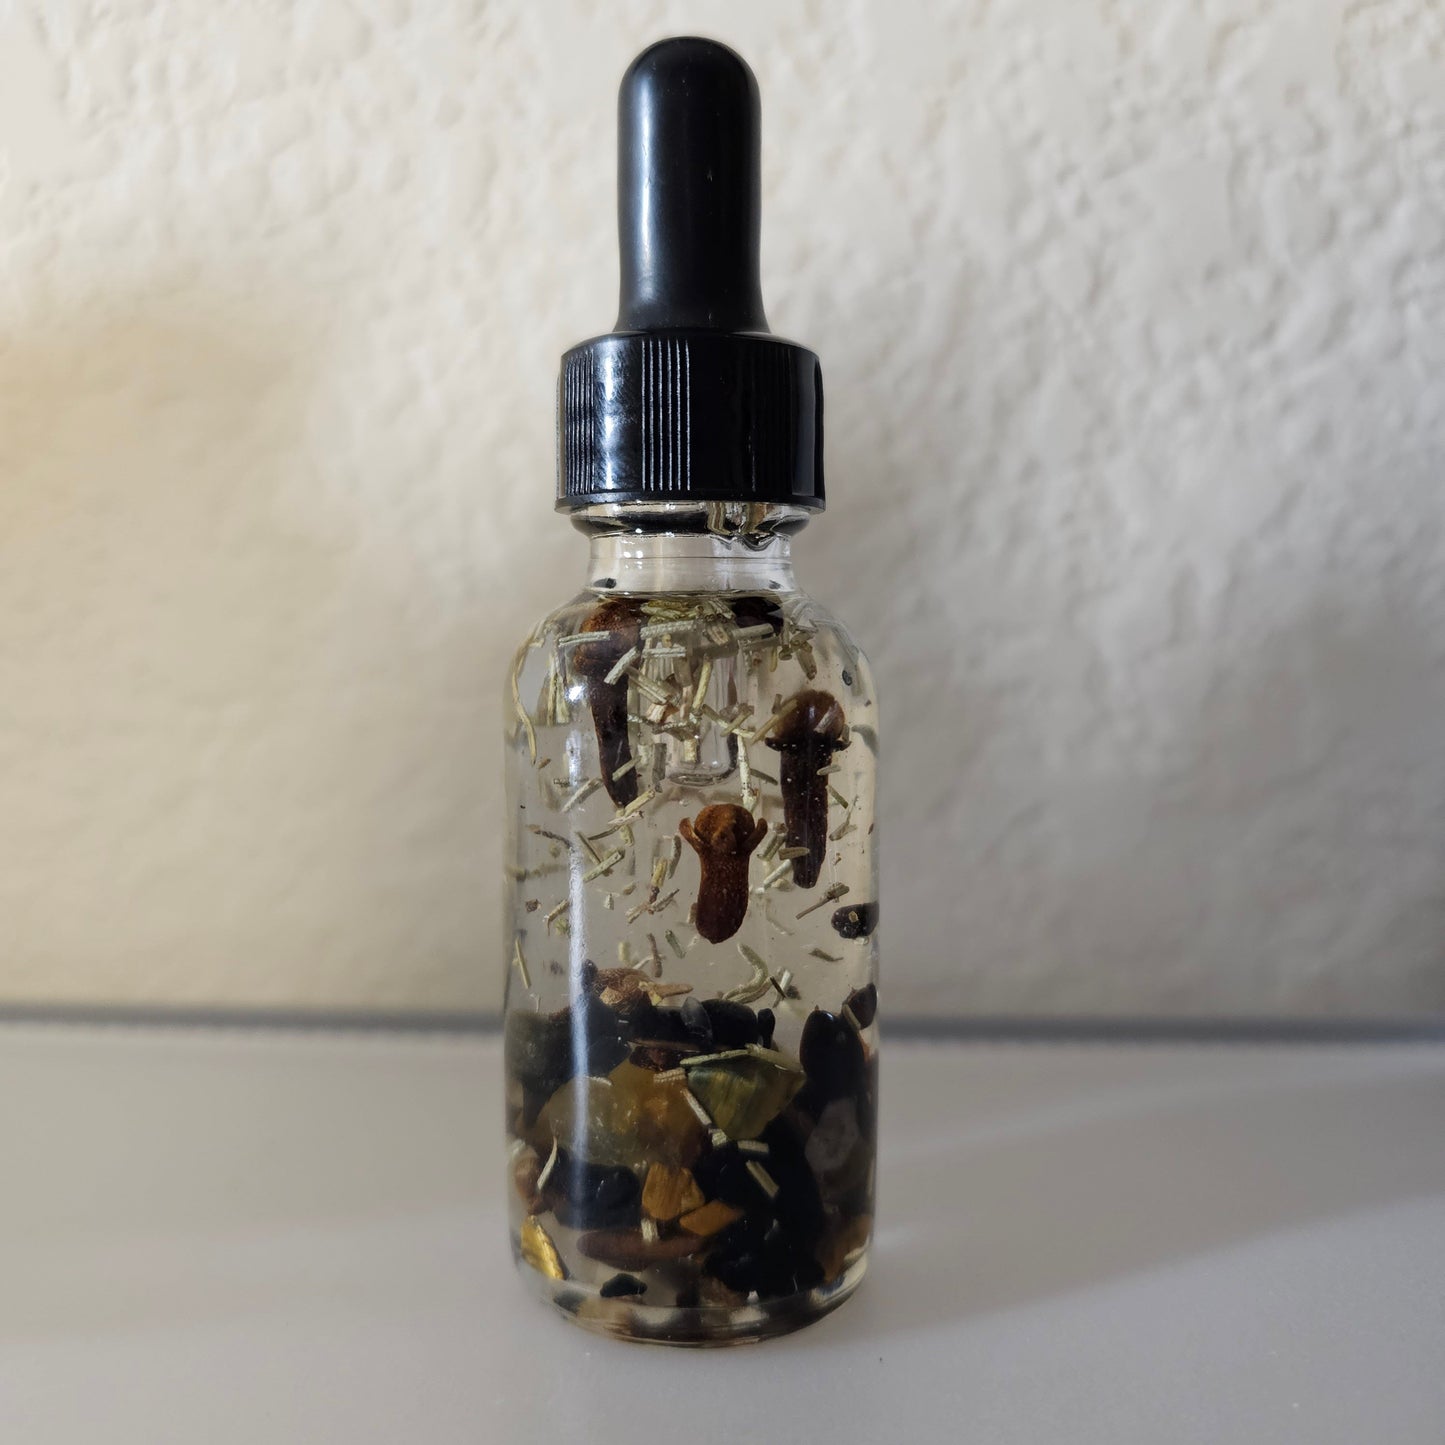 Anubis God Oil | Ritual & Spell Work, Altars, Invocation, Manifestation, and Intentions